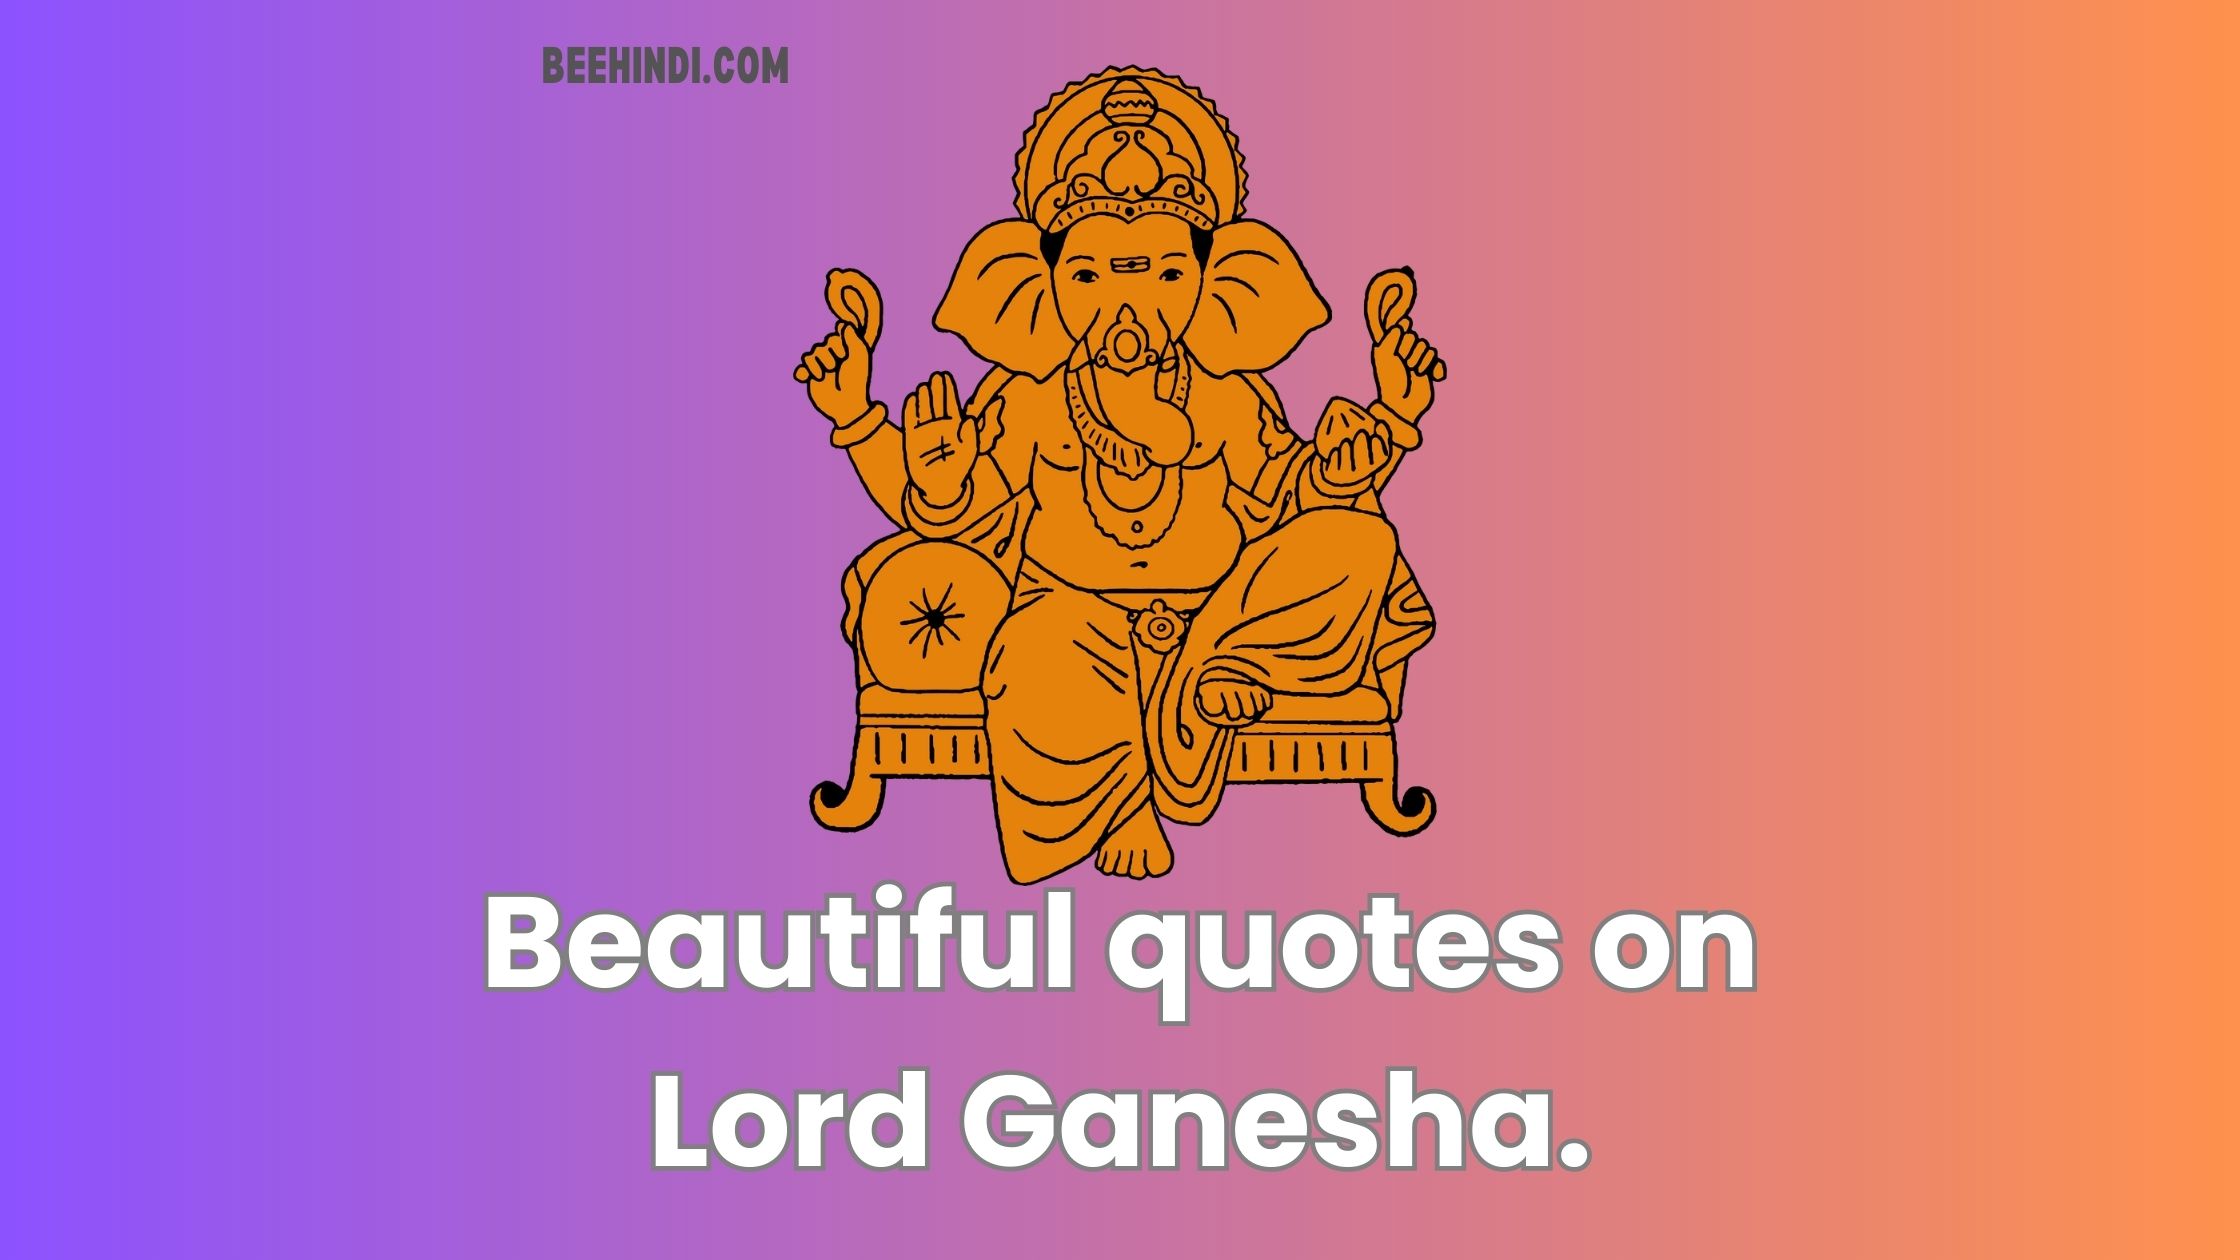 Top 25 beautiful quotes on Lord Ganesha.